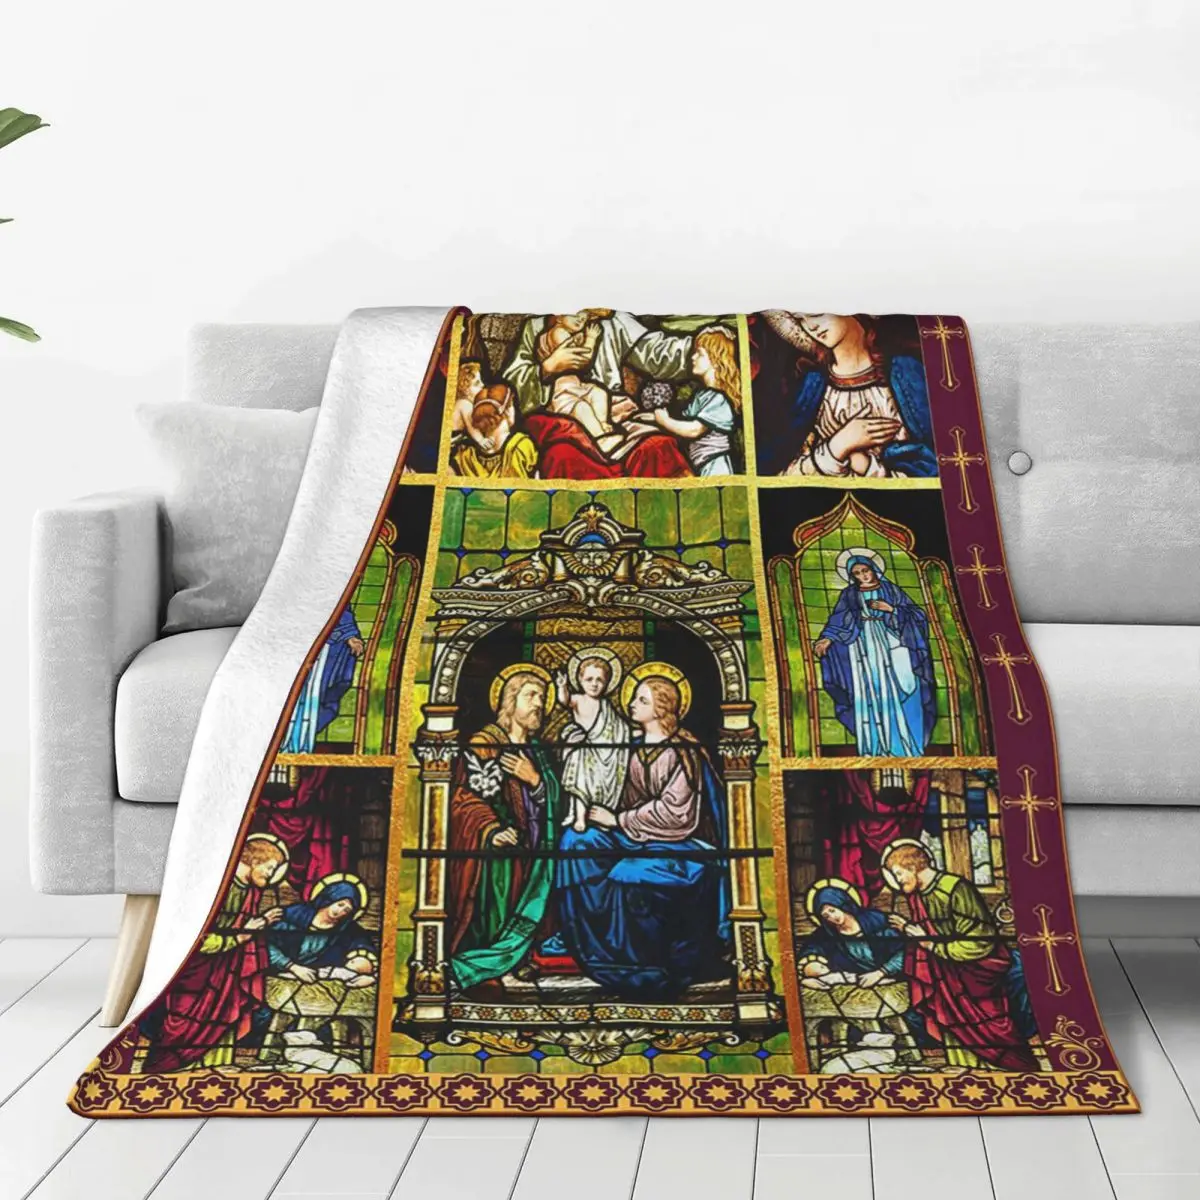 

Jesus Virgin Mary Christian Catholic Plaid Blankets Fleece Spring/Autumn Warm Throw Blankets for Bedding Couch Plush Thin Quilt